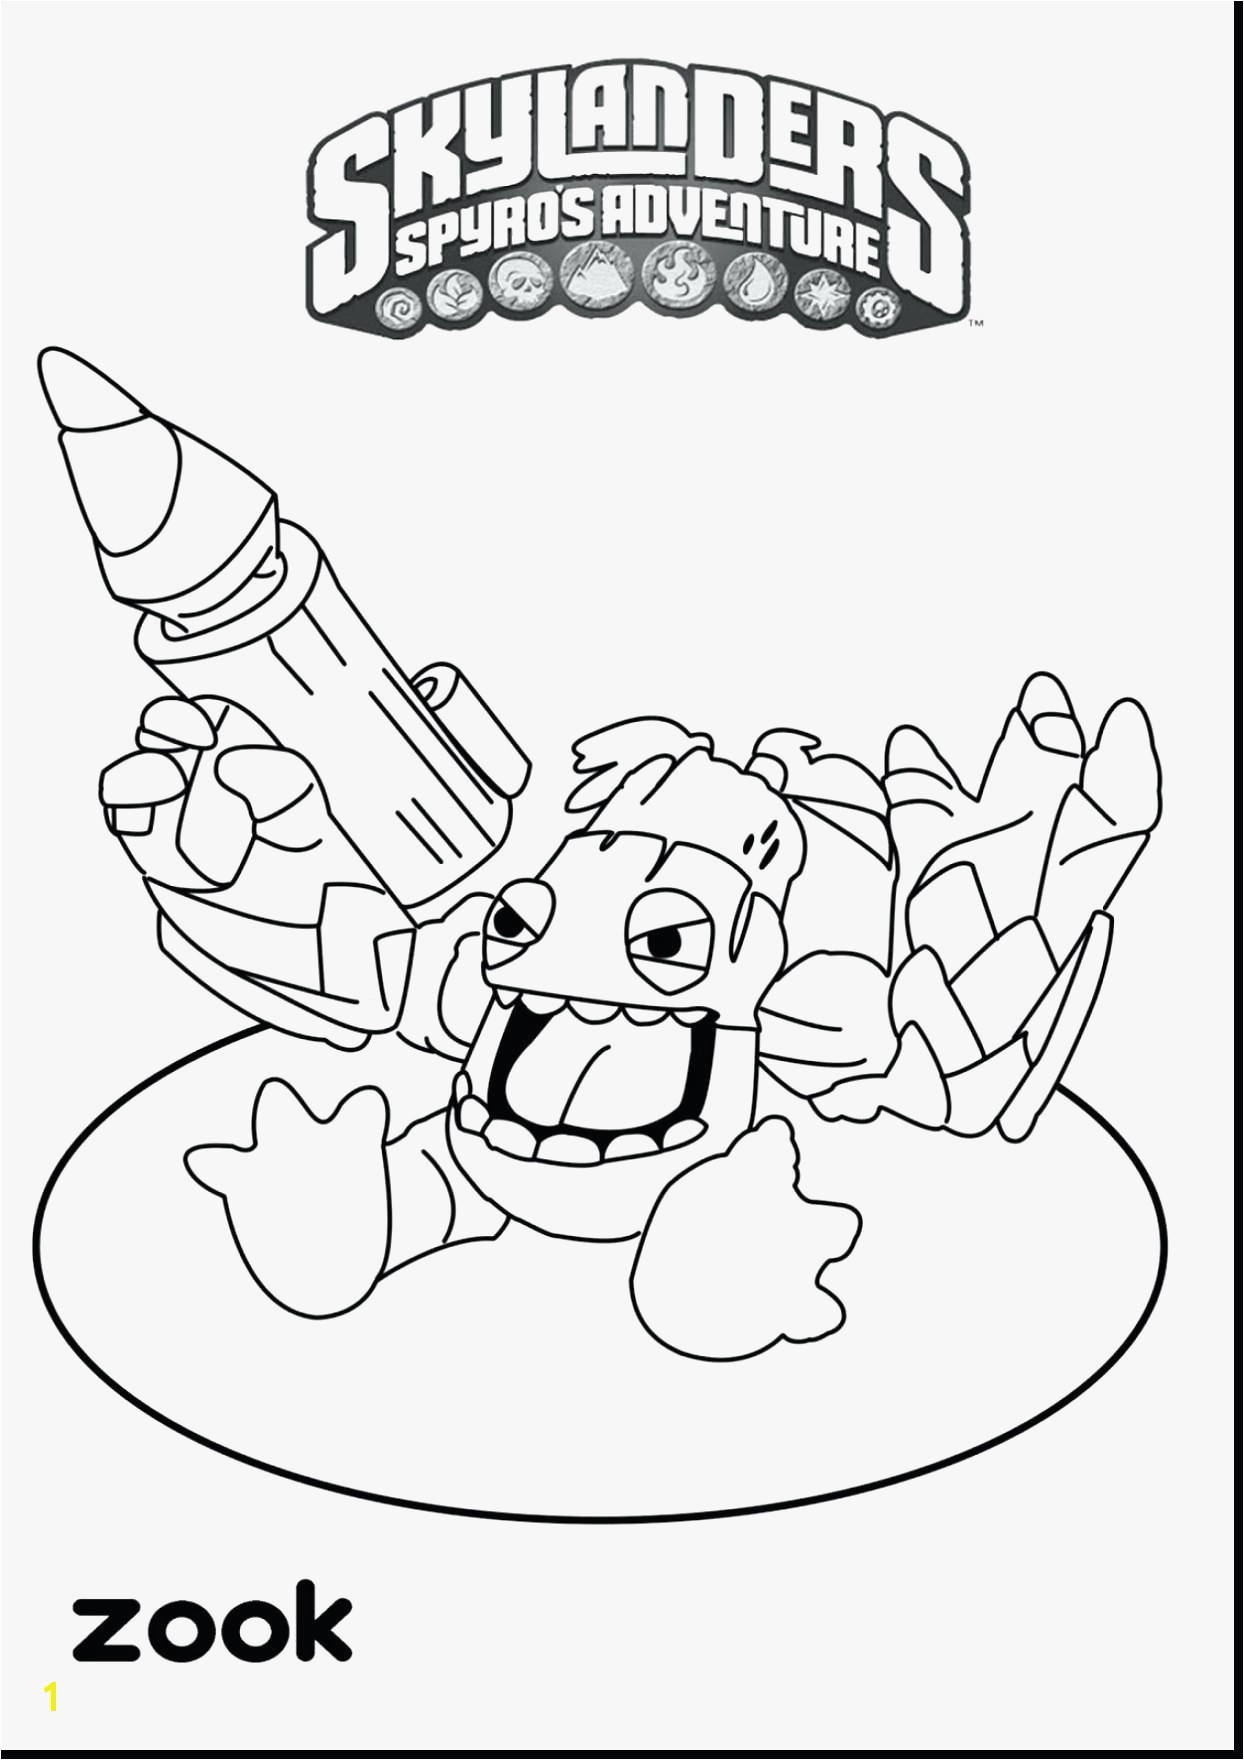 Free Coloring Pages Of the Three Wise Men 12 New Coloring Pages for Summer